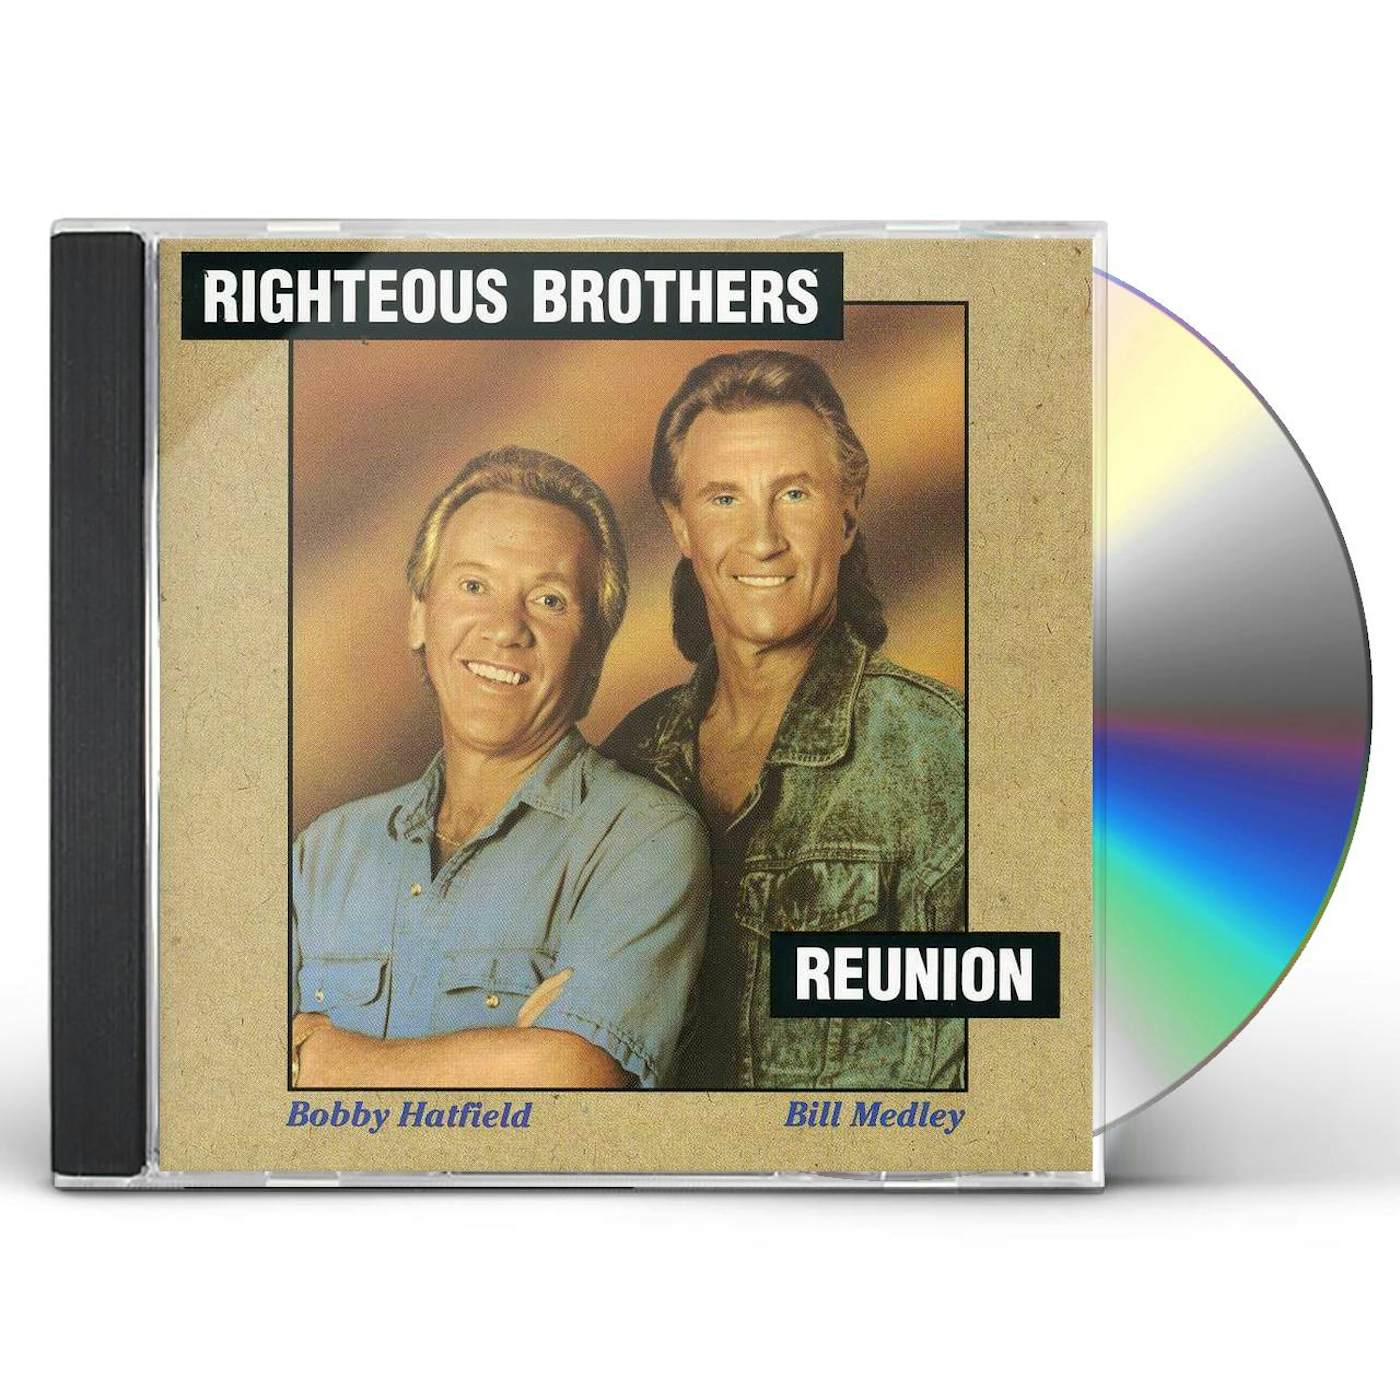 The Righteous Brothers REUNION CD